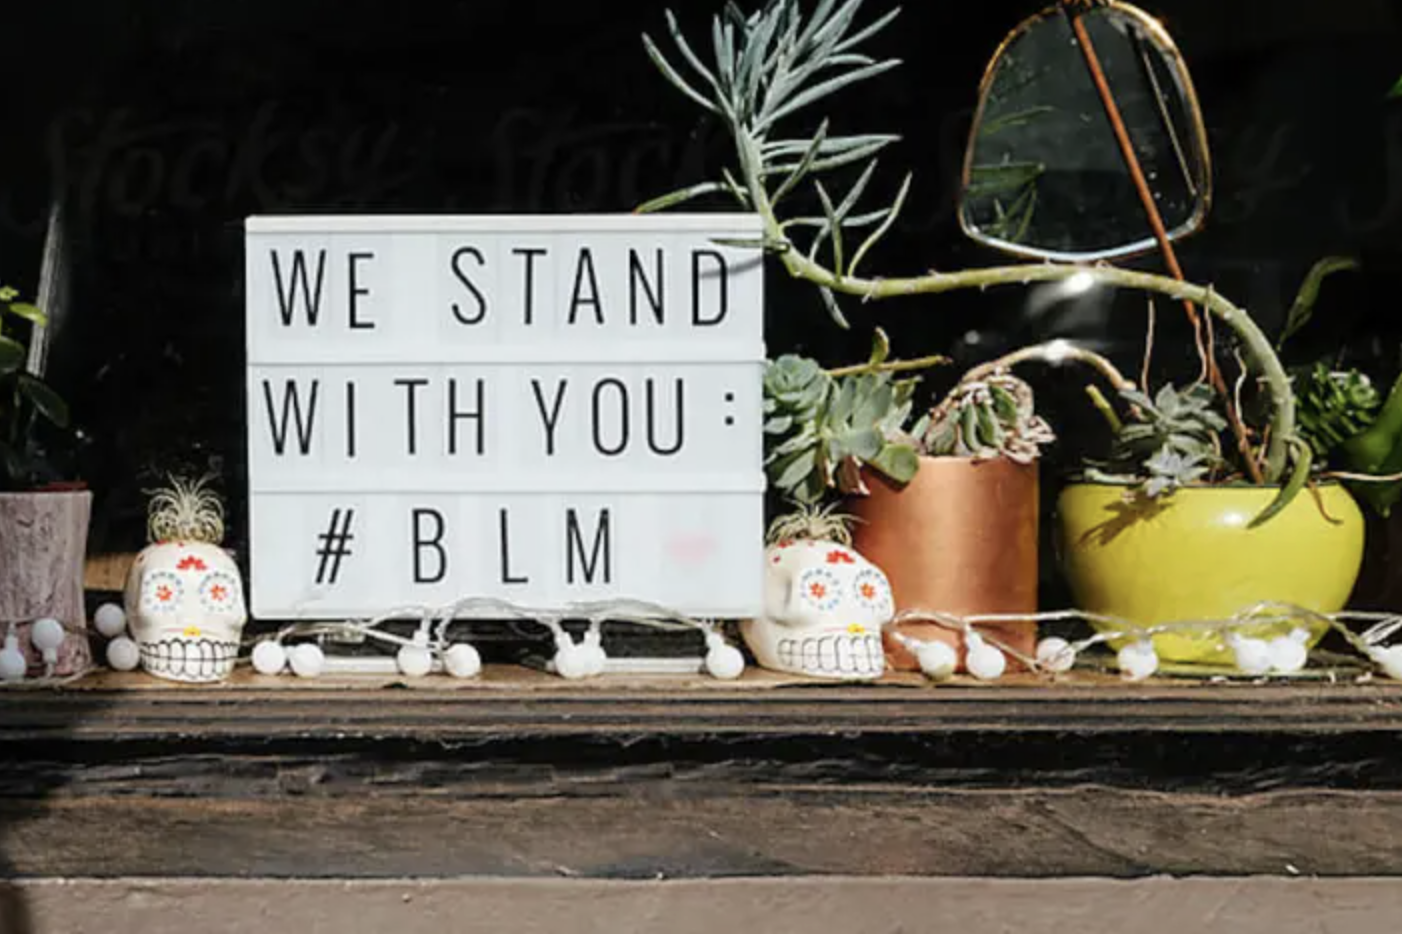 A table with Mexican skull planter pots, string lights, and a sign saying "We stand with you: #BLM".